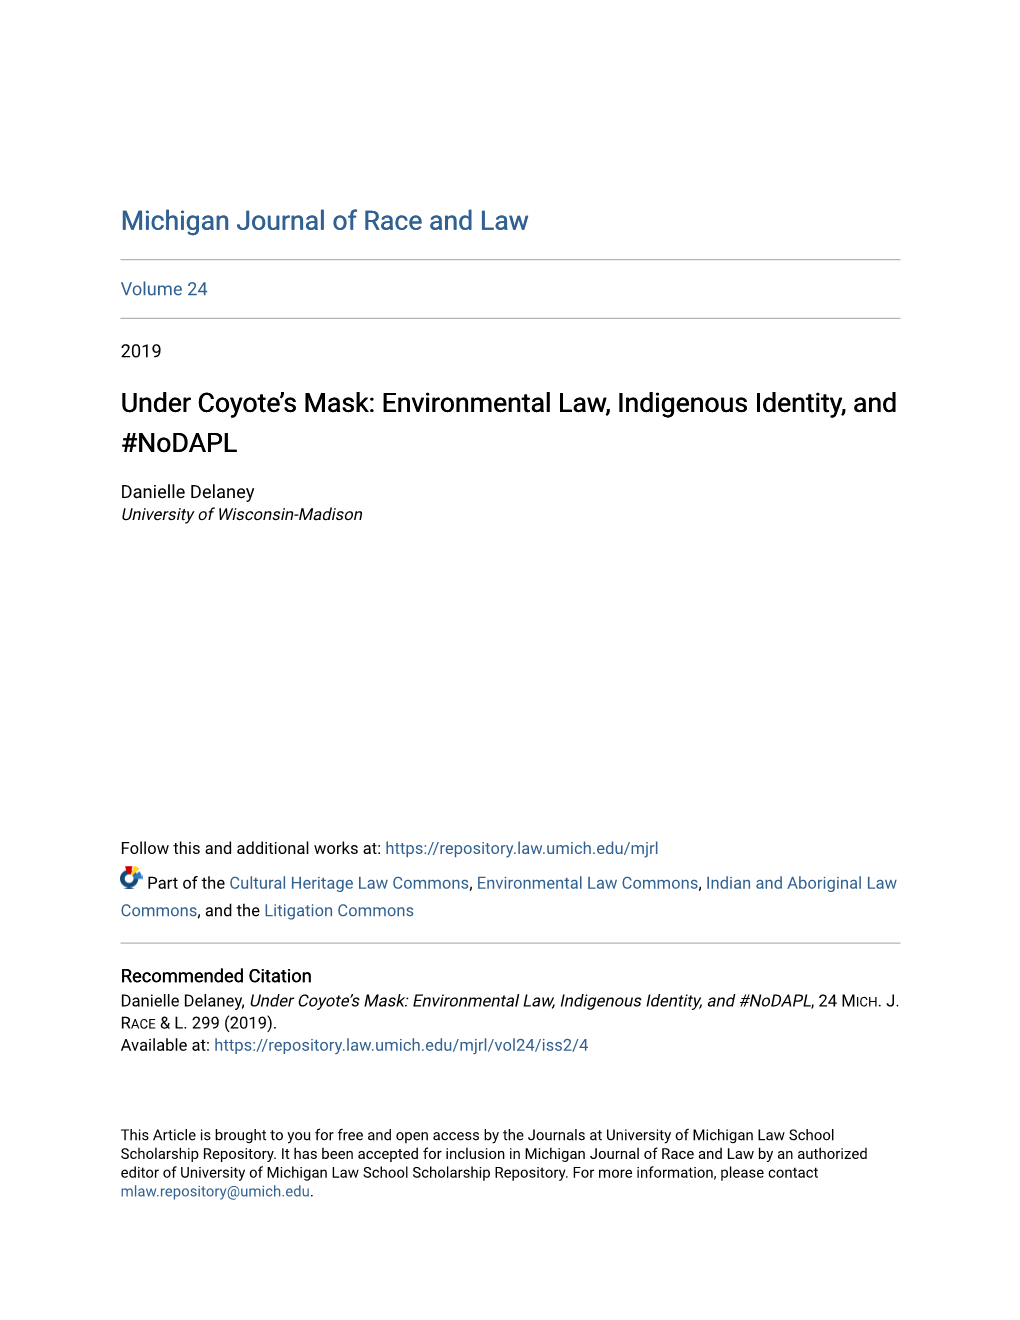 Environmental Law, Indigenous Identity, and #Nodapl